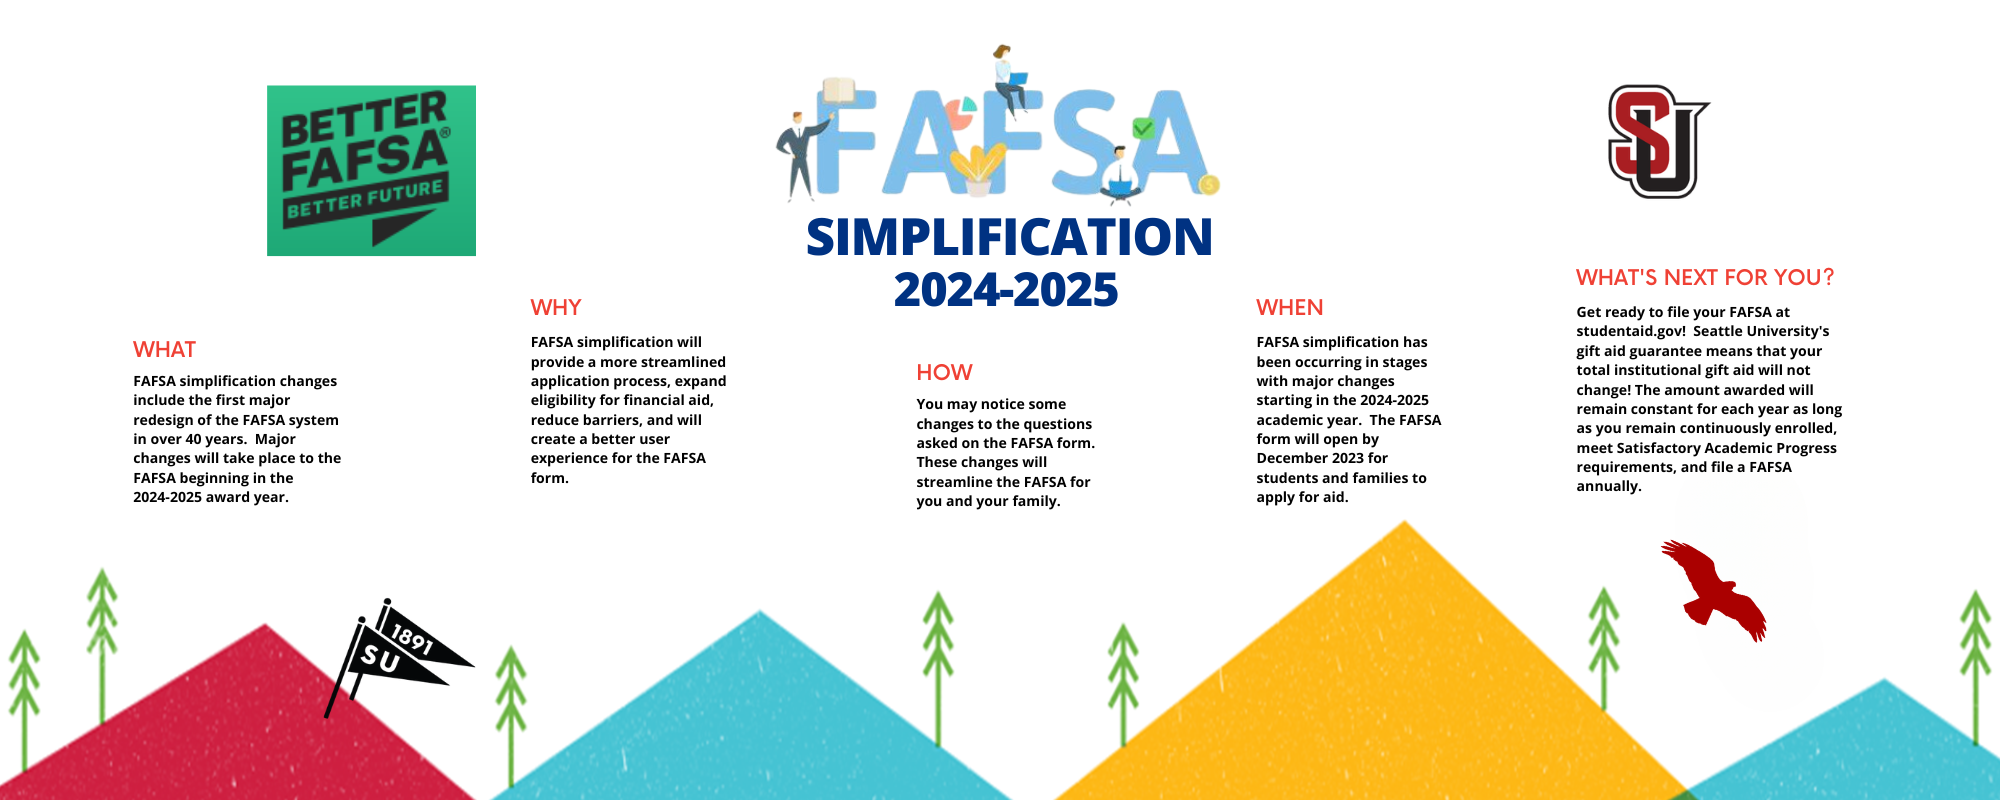 FAFSA Simplification Infographic